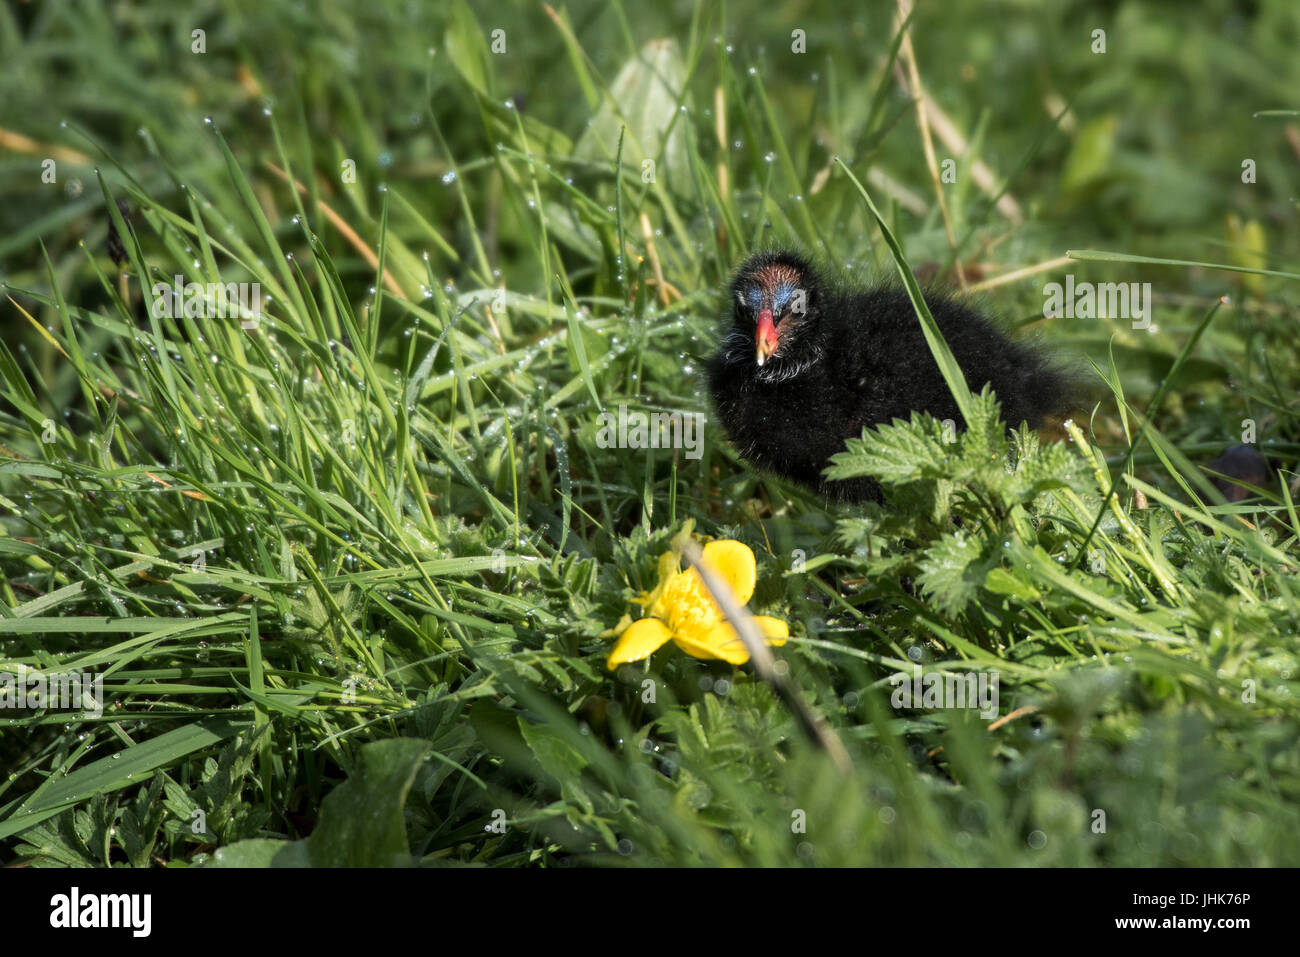 Moorhen chick skulking in dew covered grass close to a bright yellow buttercup flower brightly lit against a soft out of focus background. Stock Photo